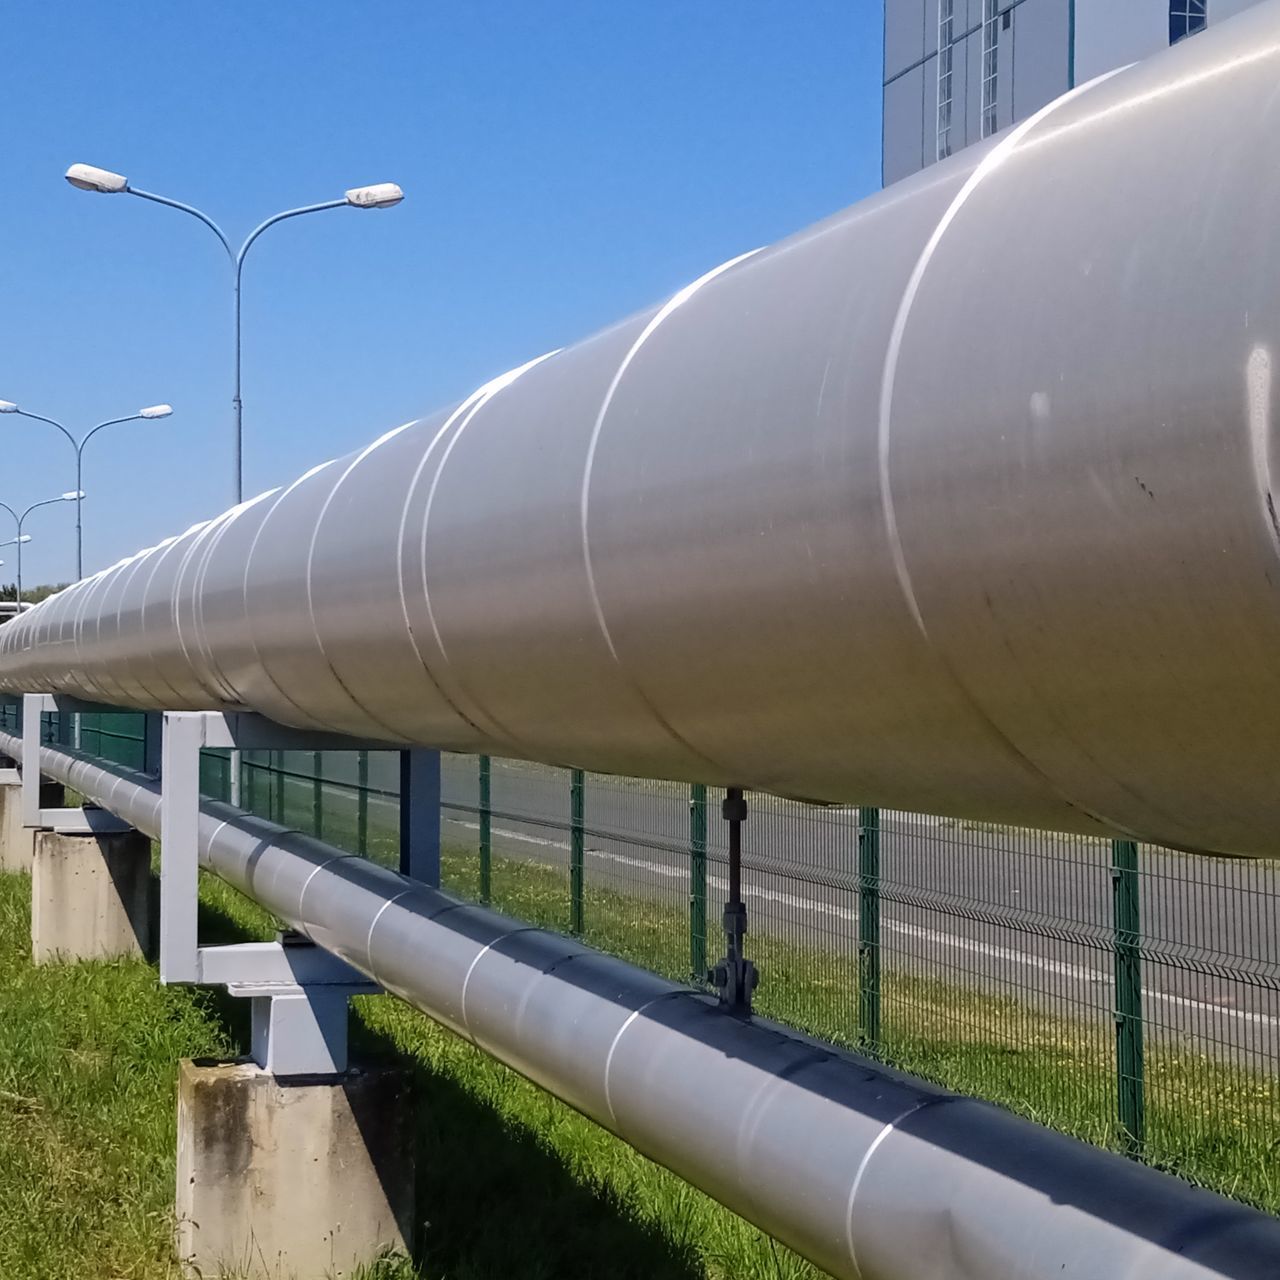 pipeline transport, pipe - tube, power generation, pipeline, industry, architecture, no people, nature, built structure, sky, fossil fuel, oil industry, outdoors, environment, technology, grass, day, business, environmental conservation, natural gas